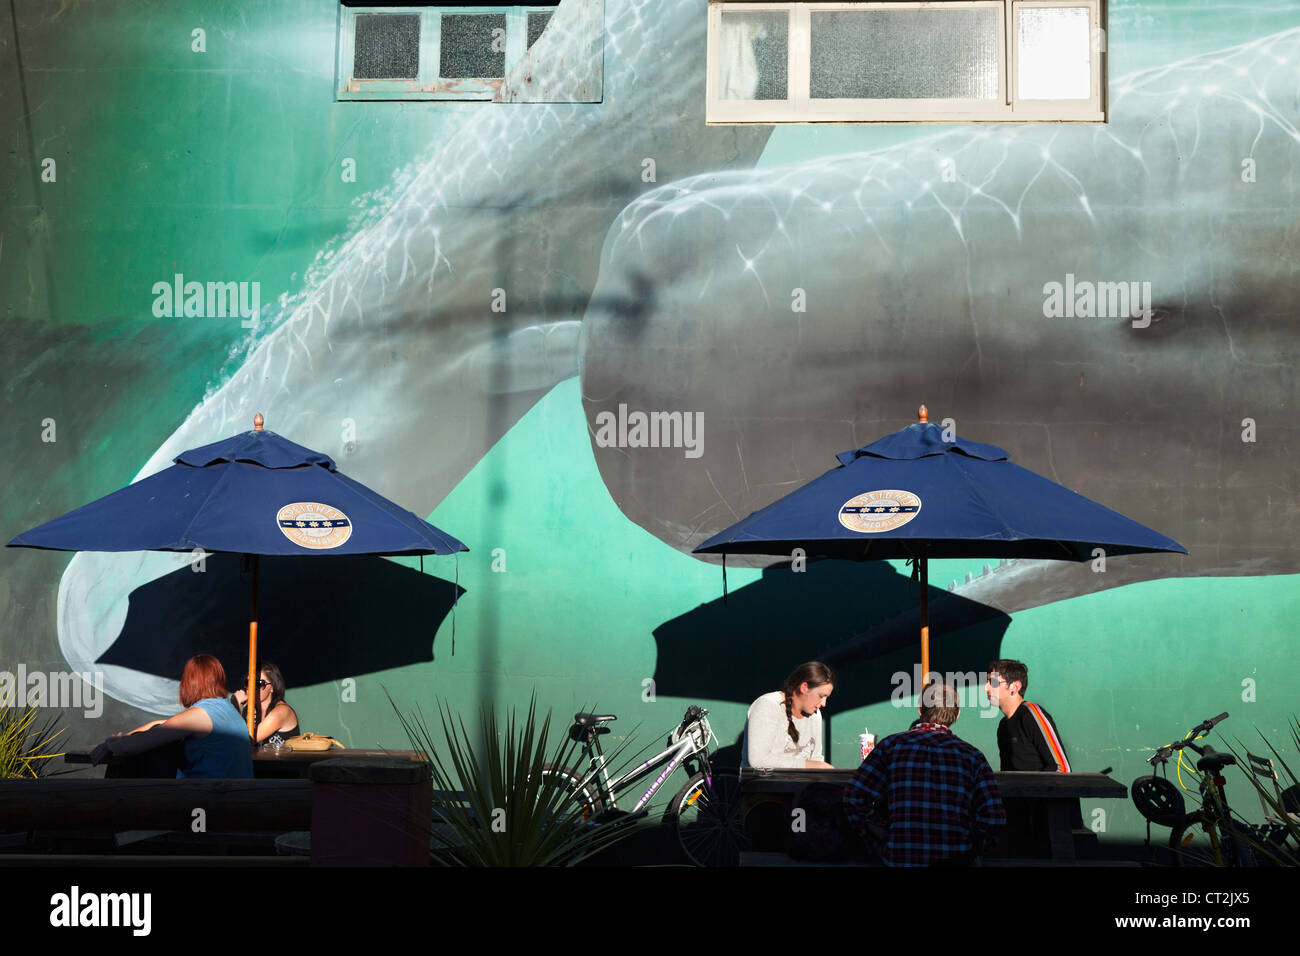 Whale-watching mural at restaurant in Kaikoura, South Island of New Zealand 4 Stock Photo